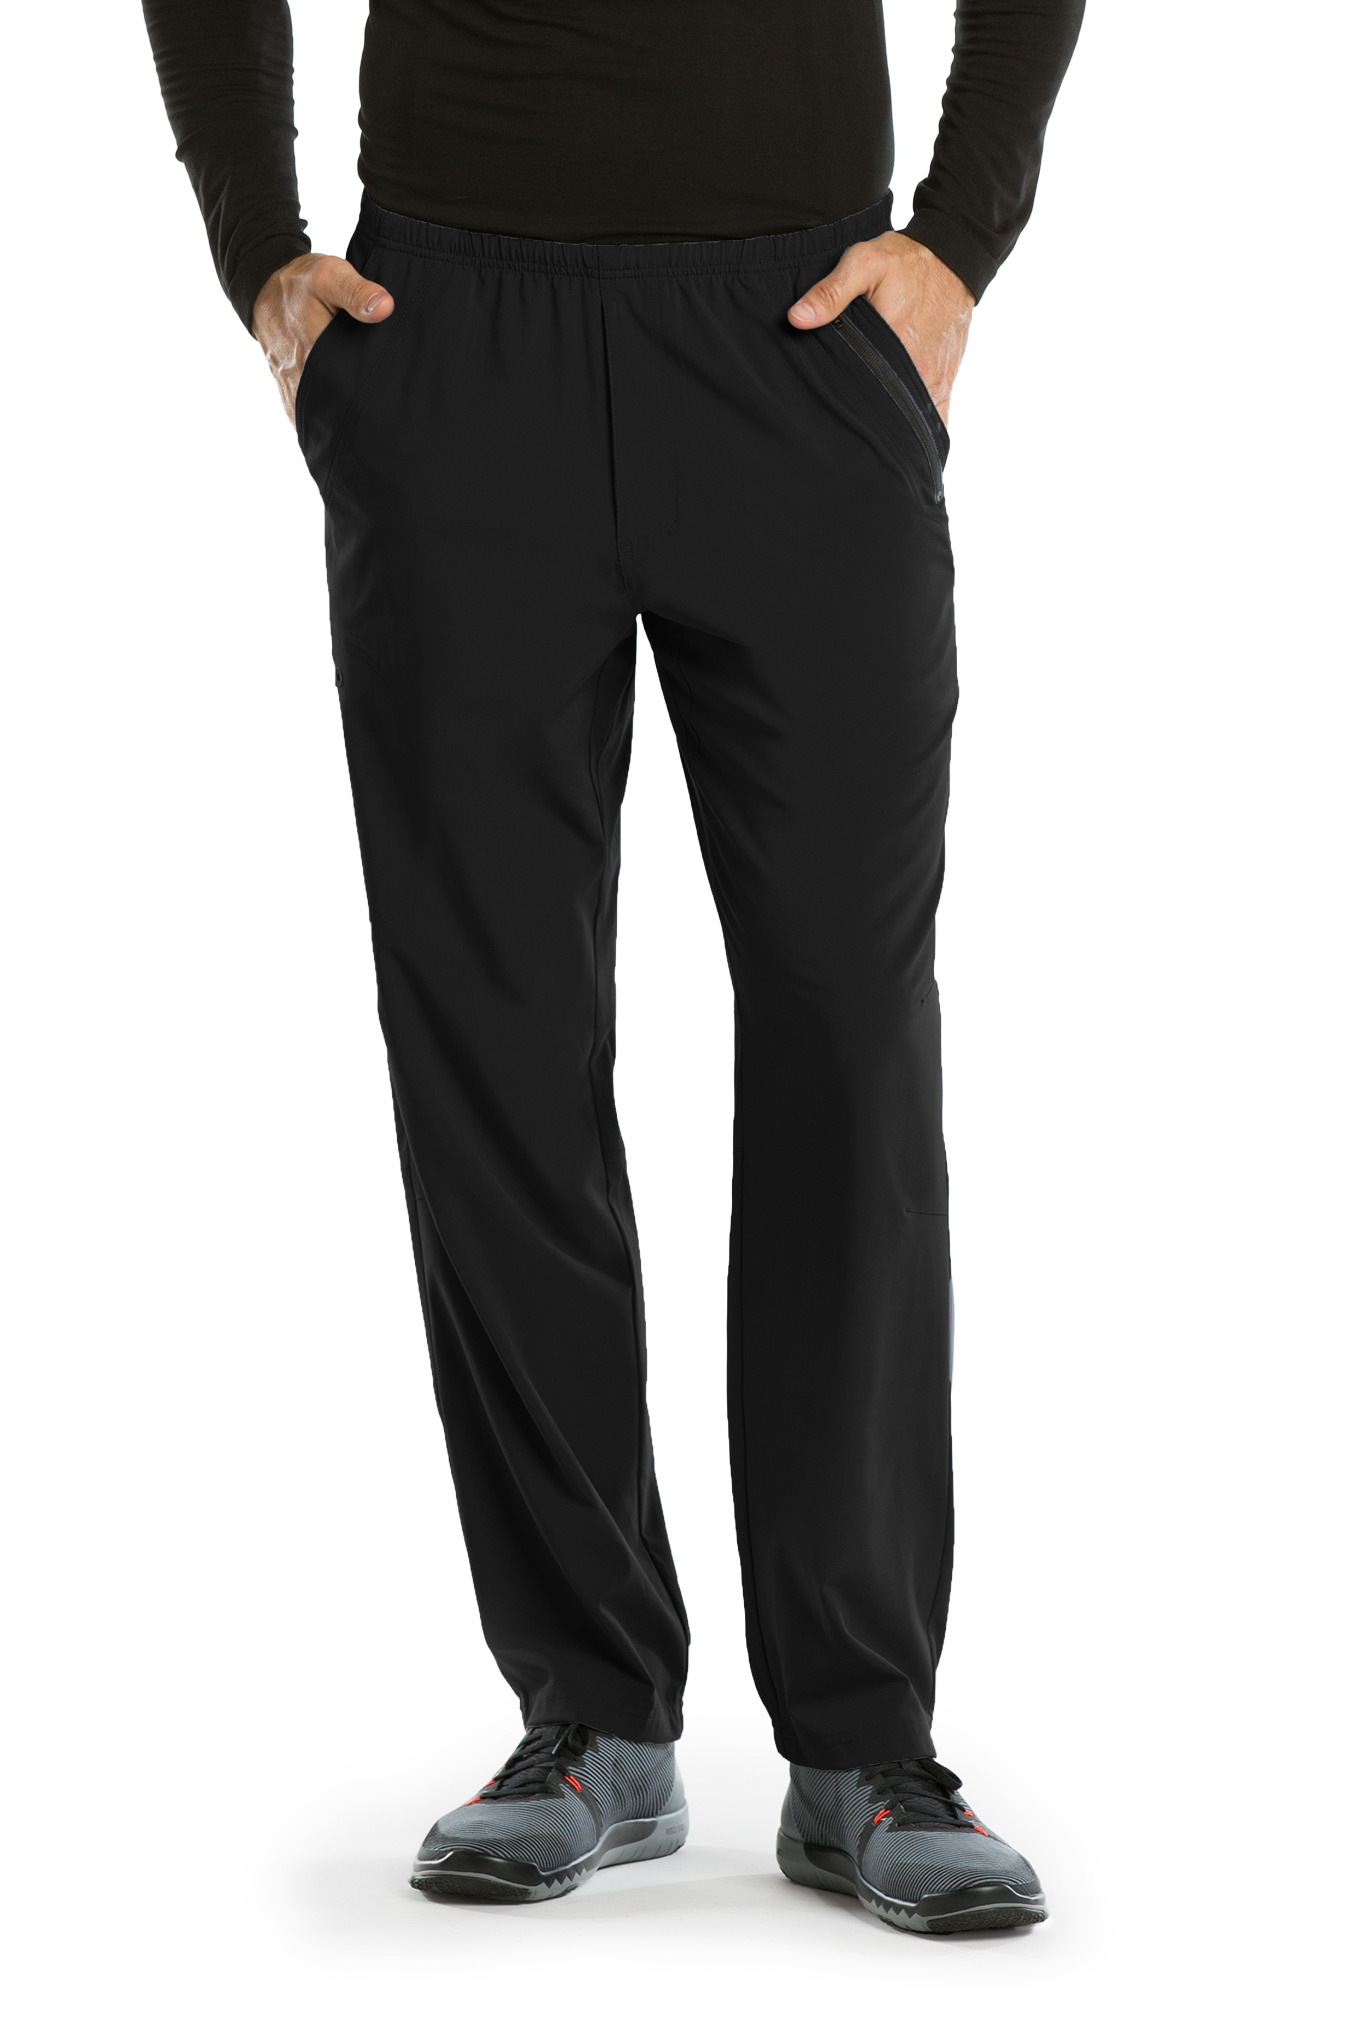 Barco One Bottoms for Medical 7pkt Cargo Elastic Pant-Barco One